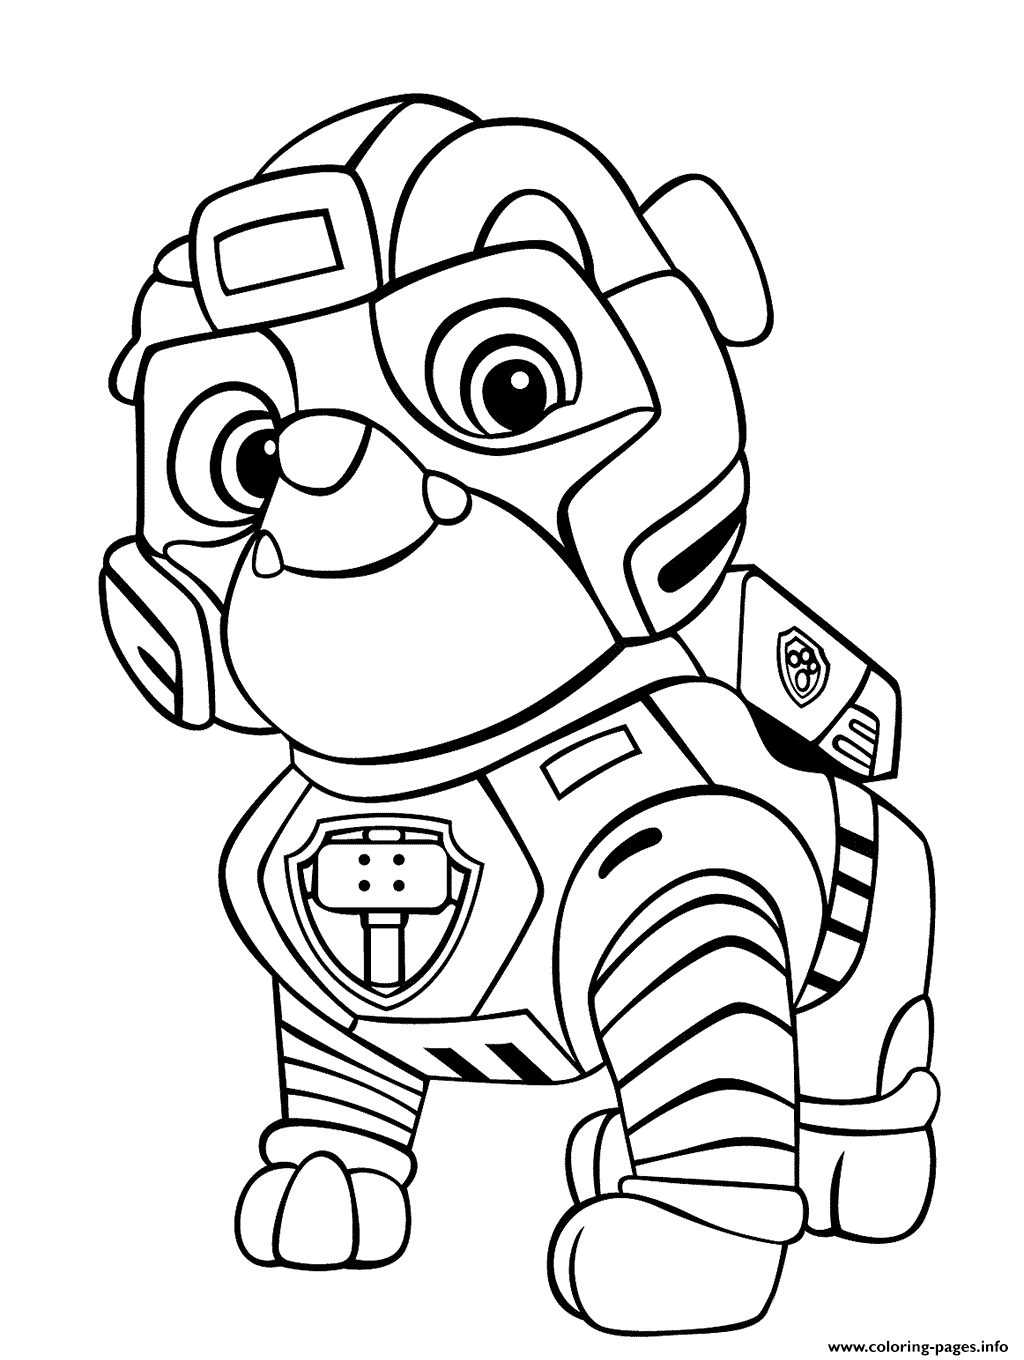 Free Download Mighty Pups Coloring Pages Paw Patrol Coloring Pages Paw Patrol Colorin